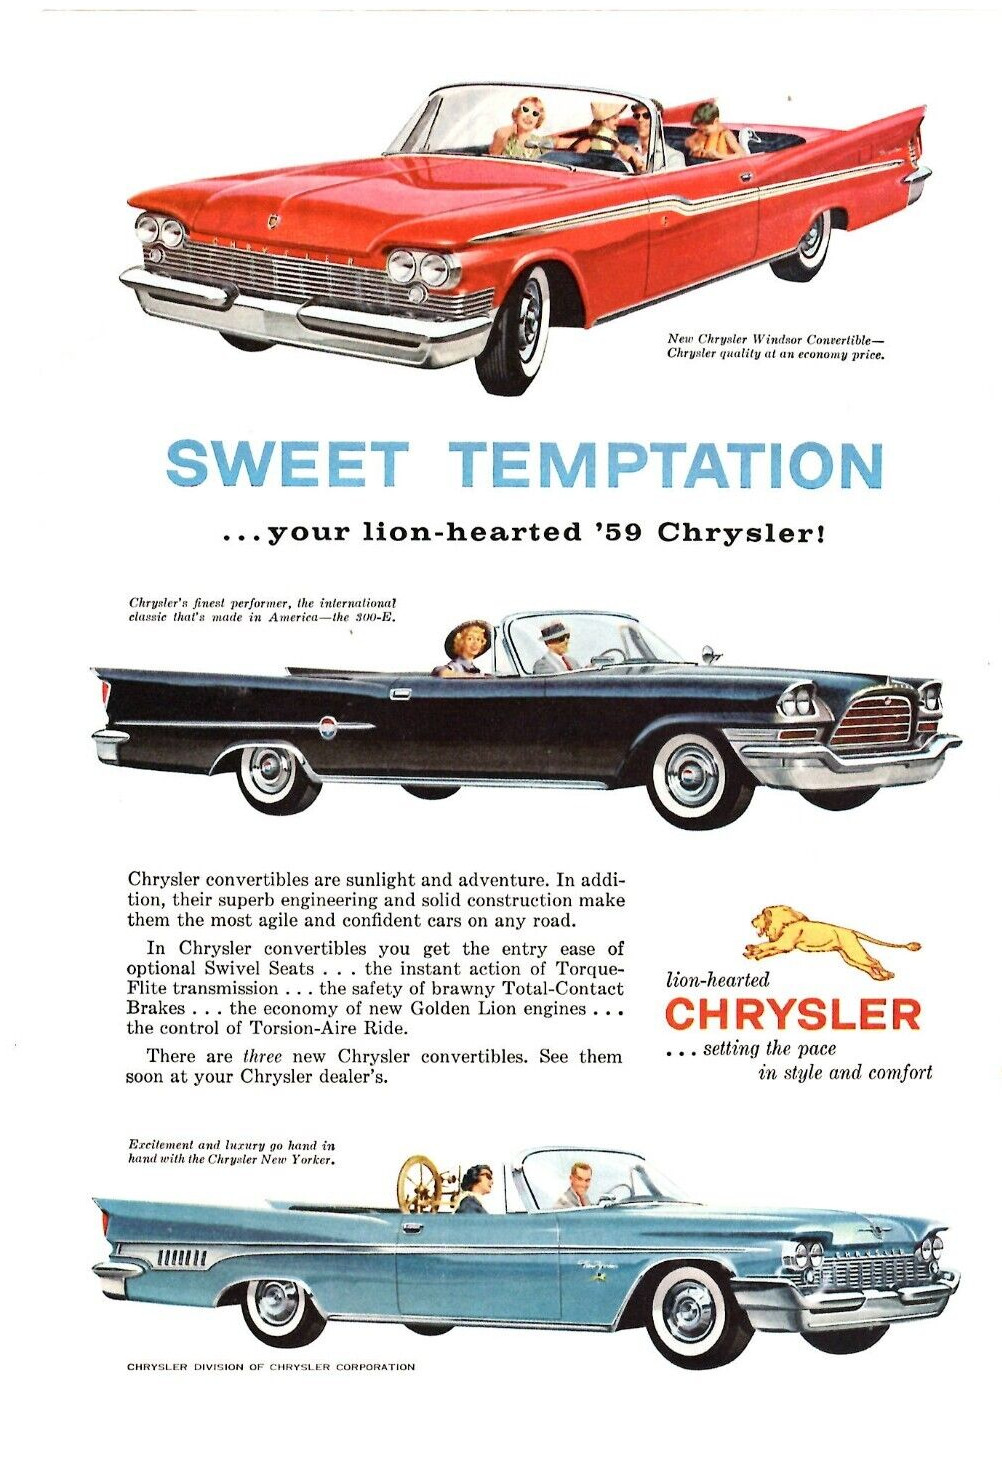 1959 Print Ad '59 Chrysler Windsor Convertible 300-E New Yorker Lion-Hearted